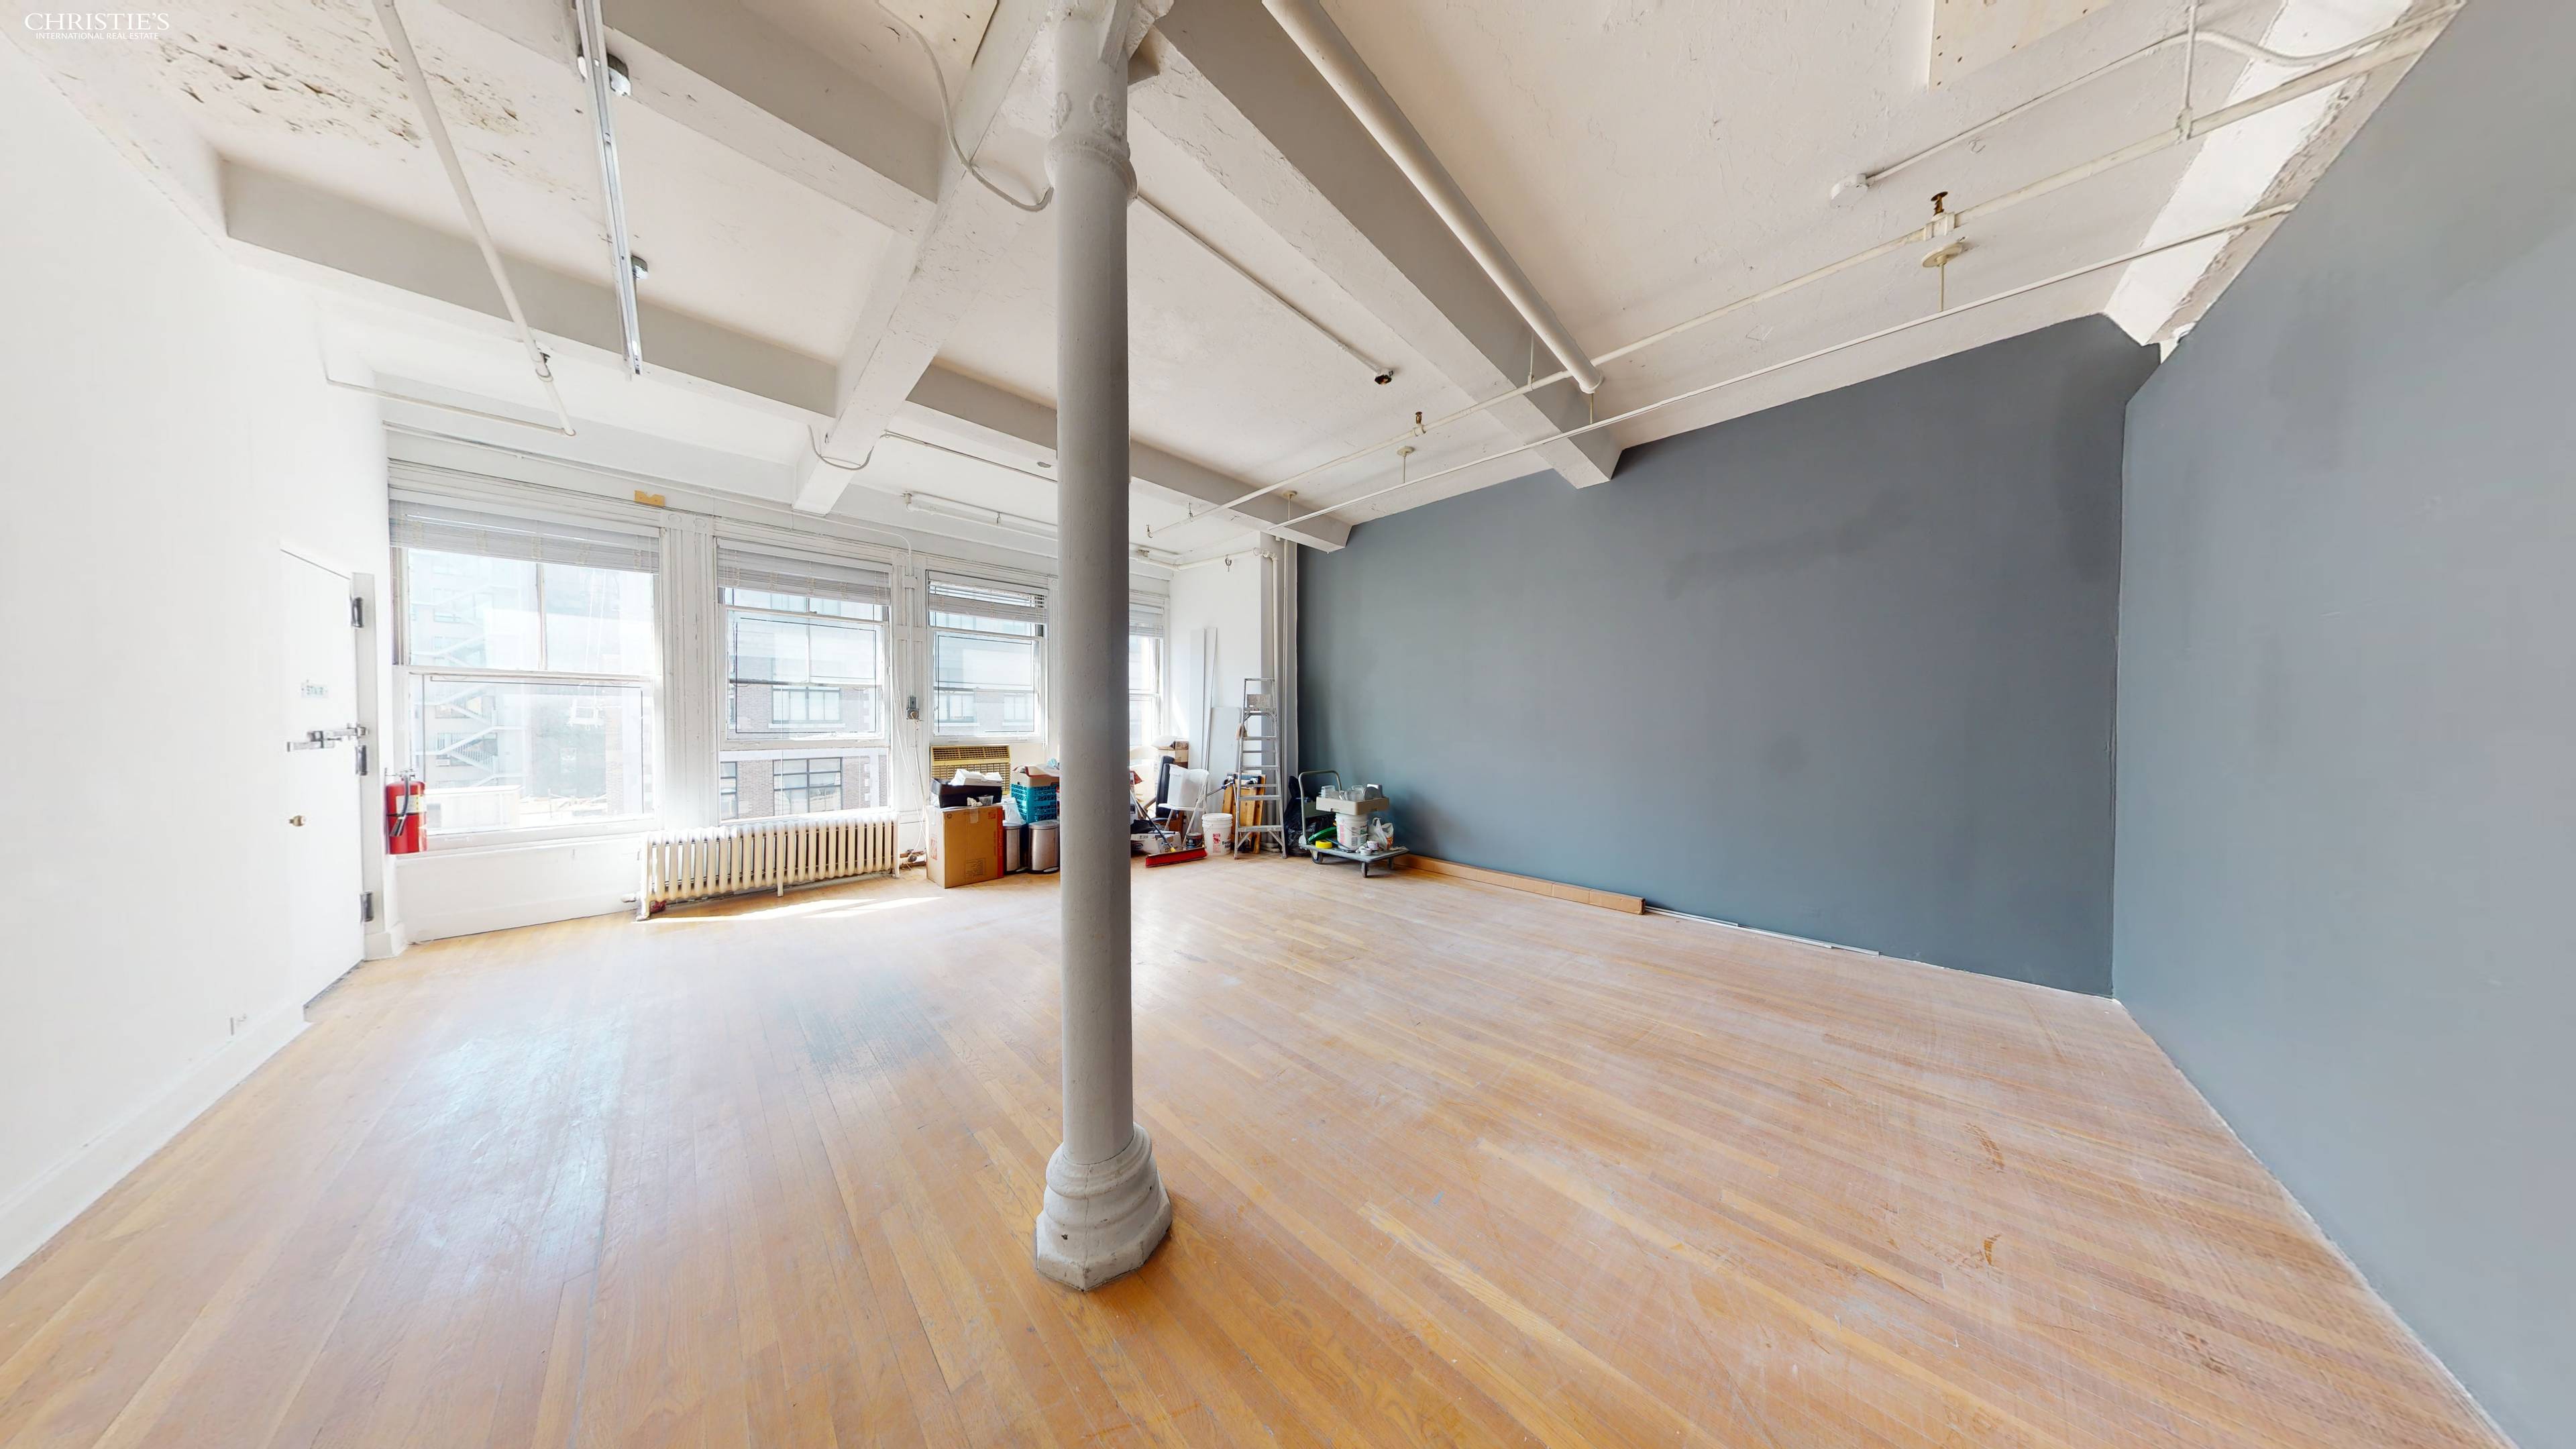 NO FEE ! Here is a rare opportunity to rent either of the top two floors of one of Noho's famed live work loft buildings and create a truly exceptional ...